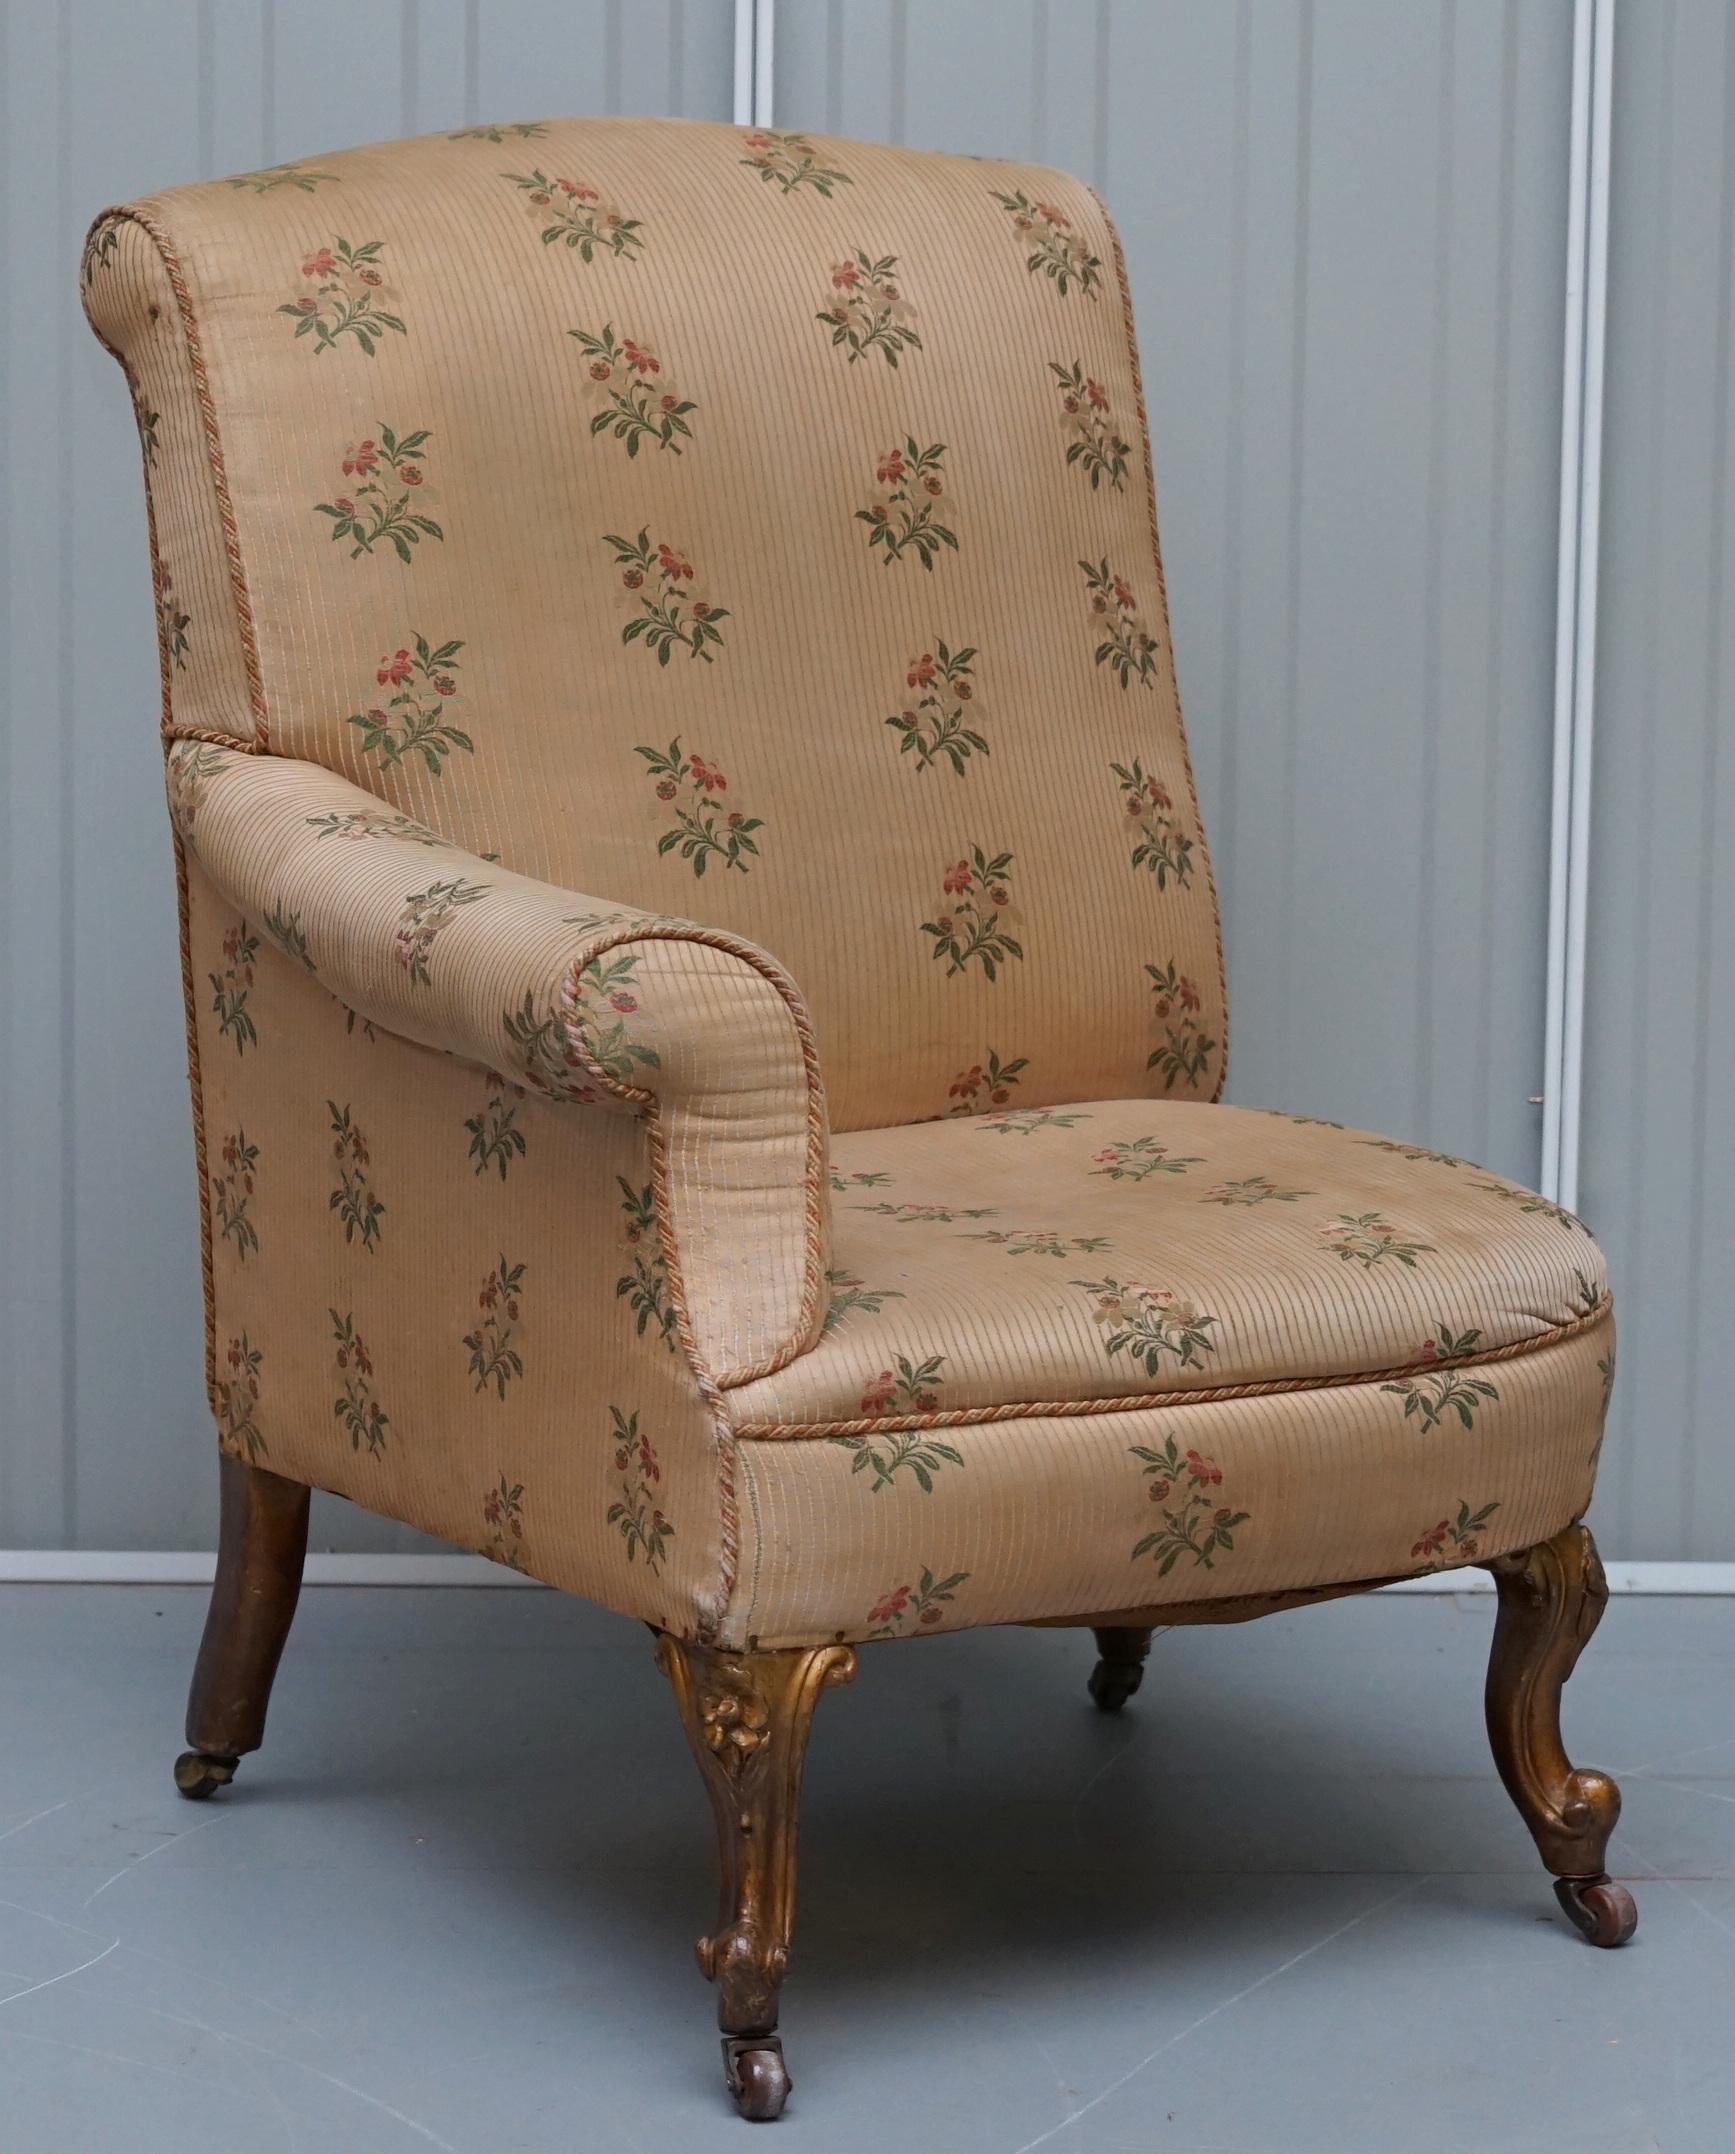 We are delighted to offer for sale this stunning and very rare pair of original Victorian giltwood asymmetrical armchairs with embroidered bird upholstery

Please note this auction includes two armchairs, the pictures include the chairs with and